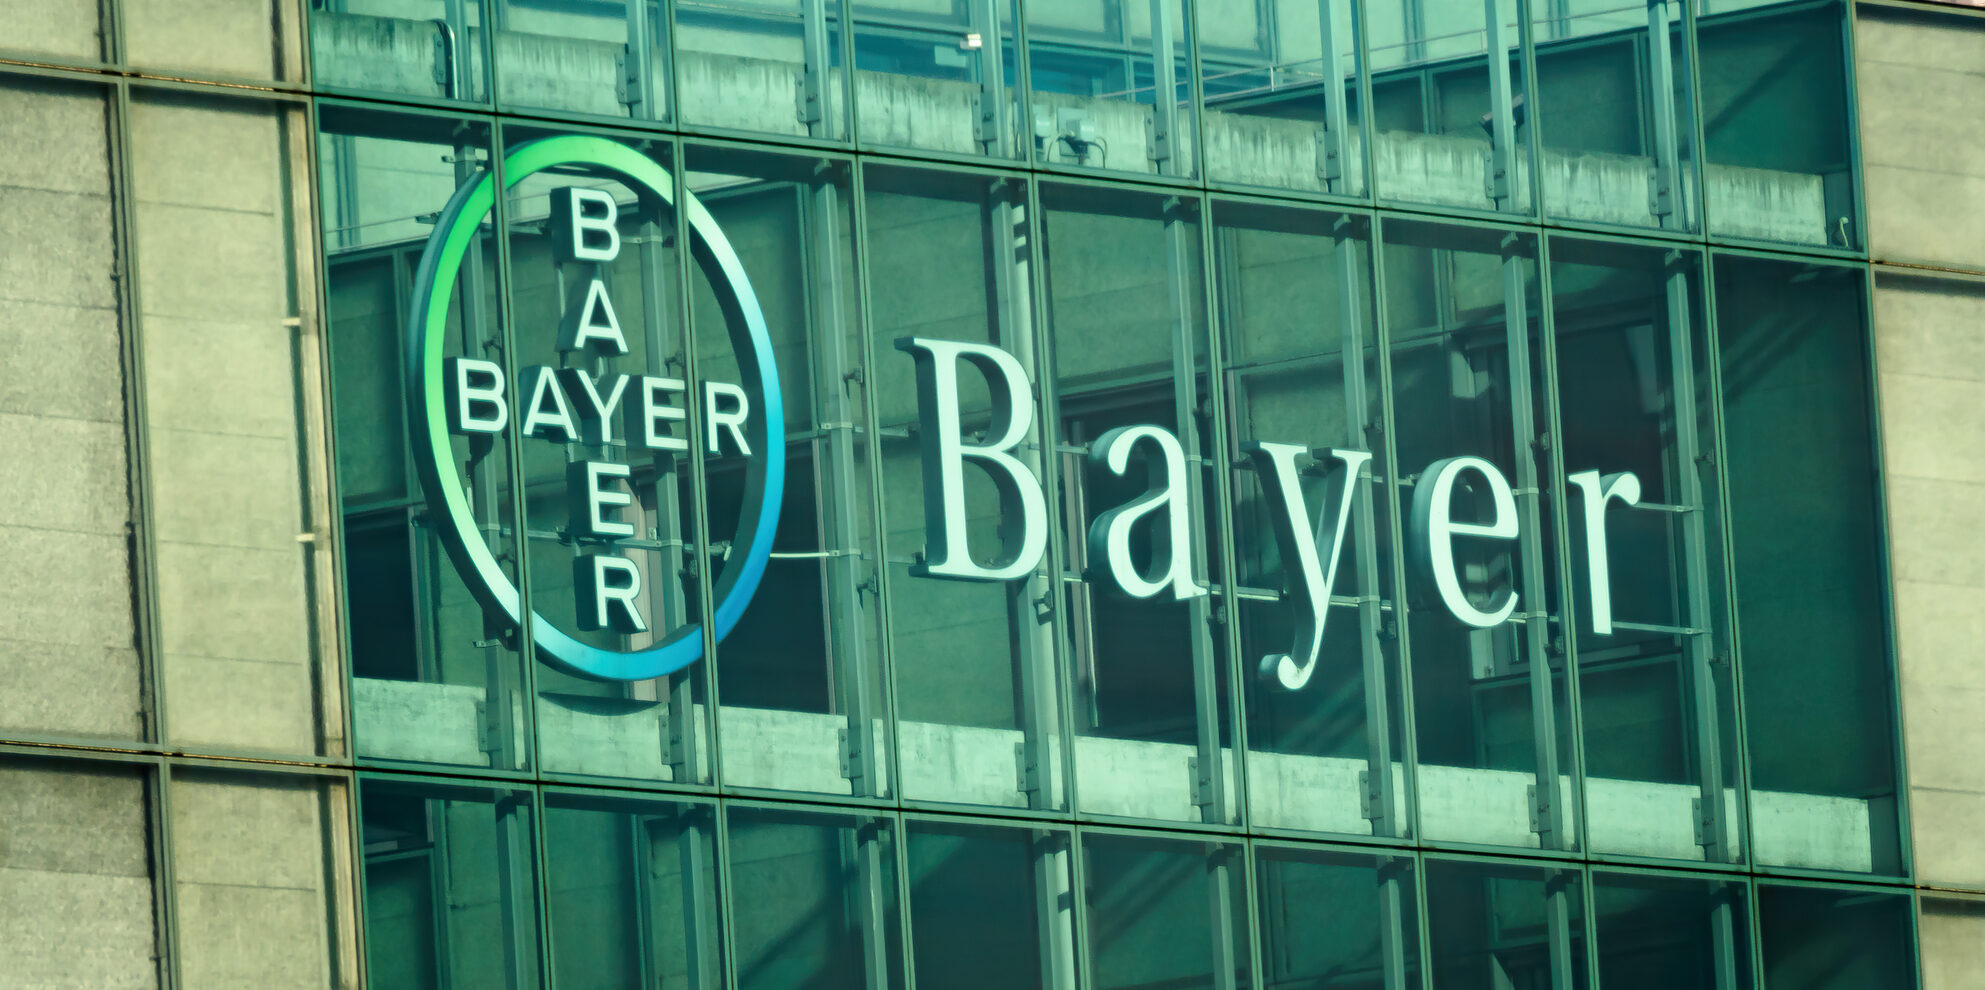 Bayer pharmaceutical company in Basel